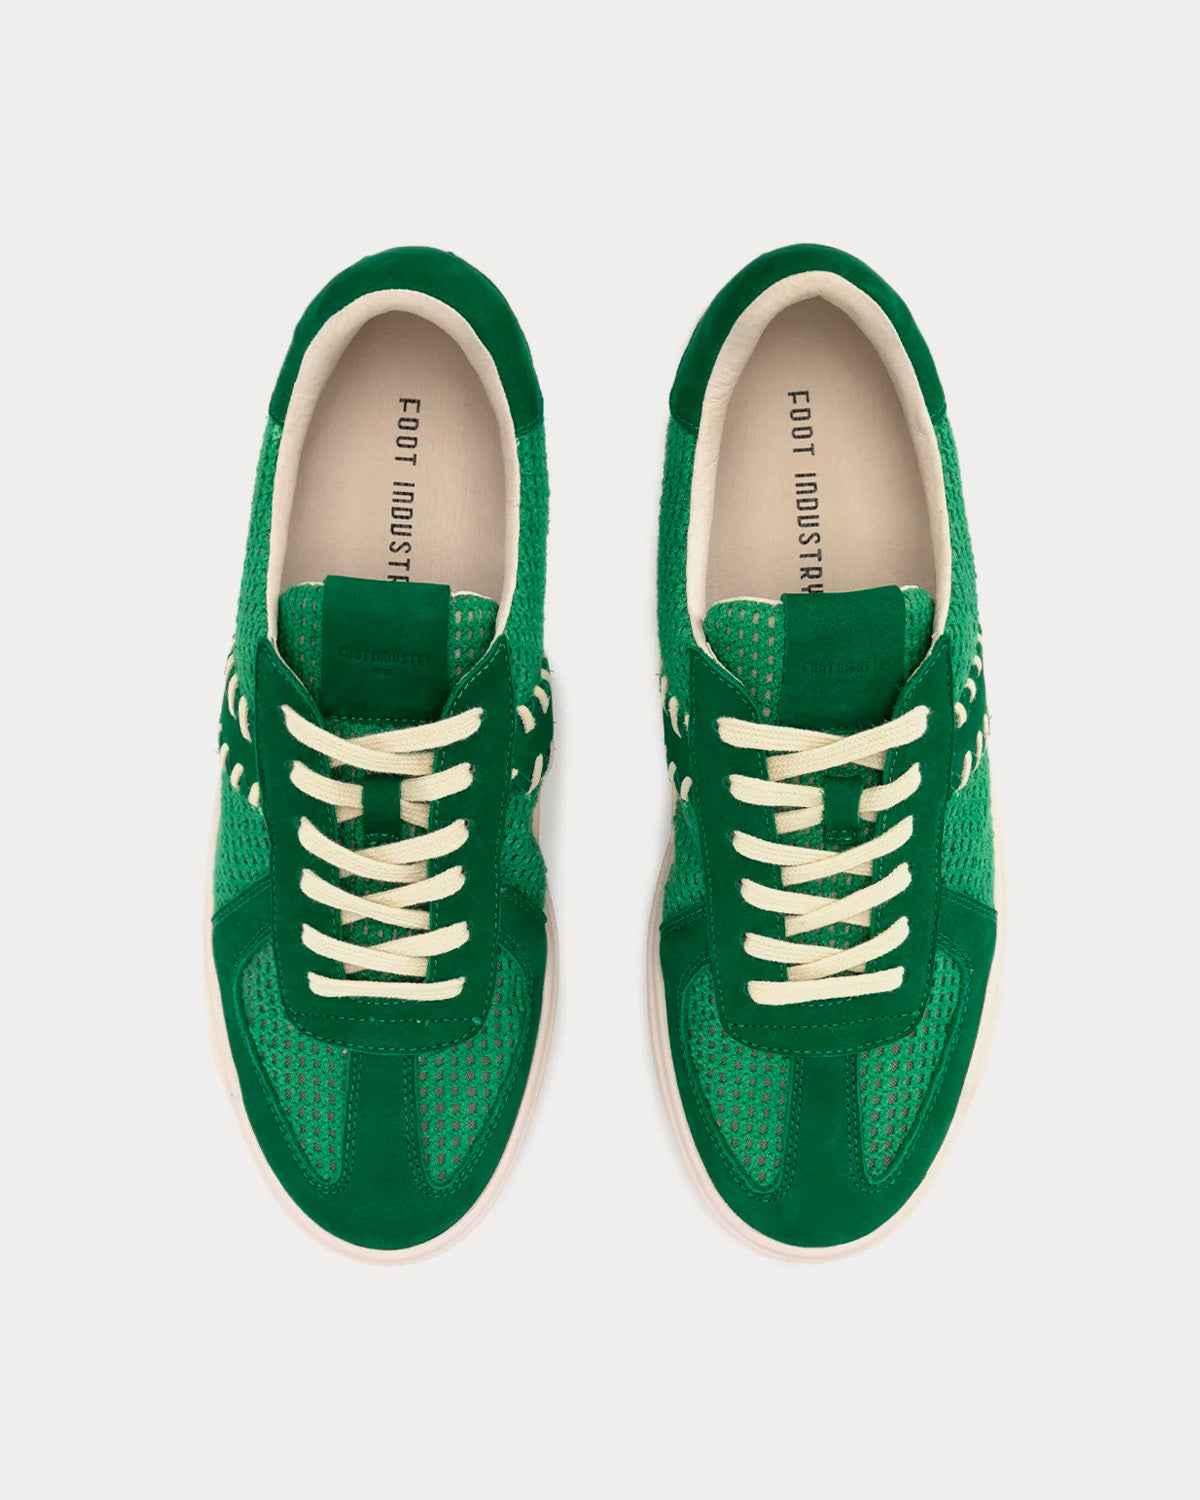 Foot Industry - 2022A/W AUA302002 Green Low Top Sneakers